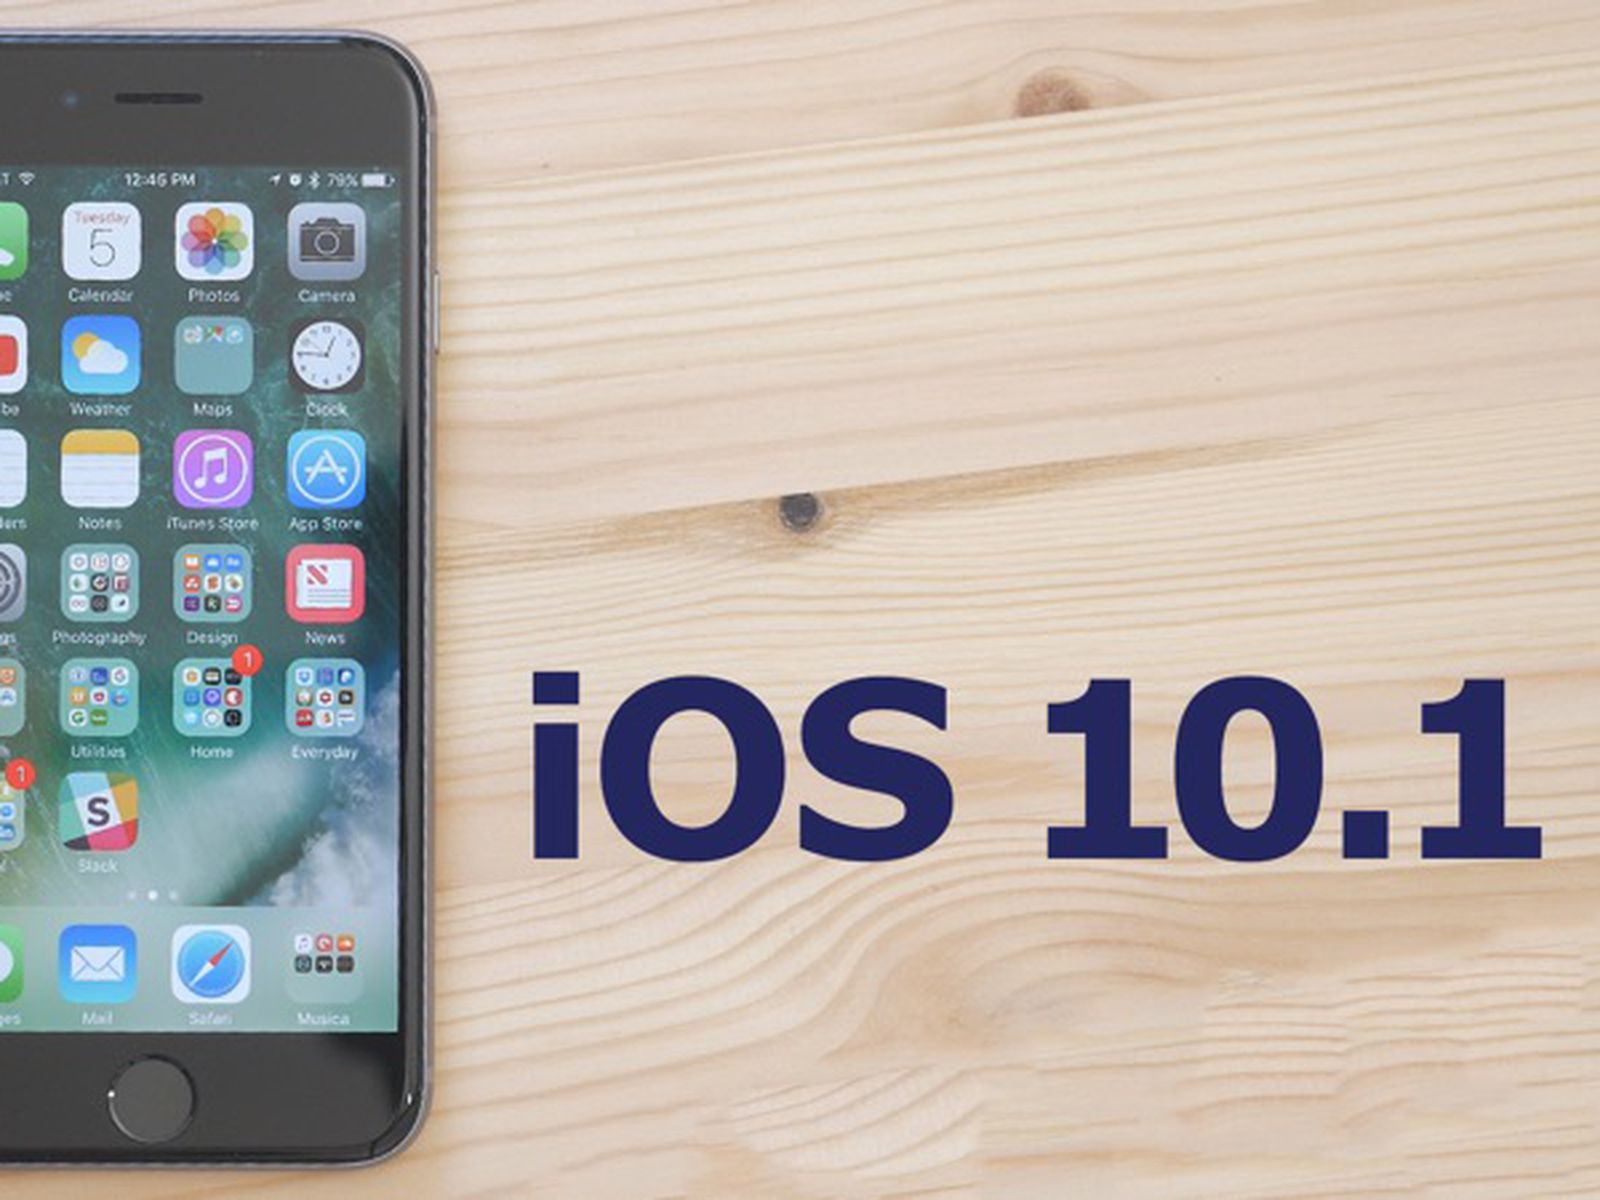 How To Download IOS 10.1